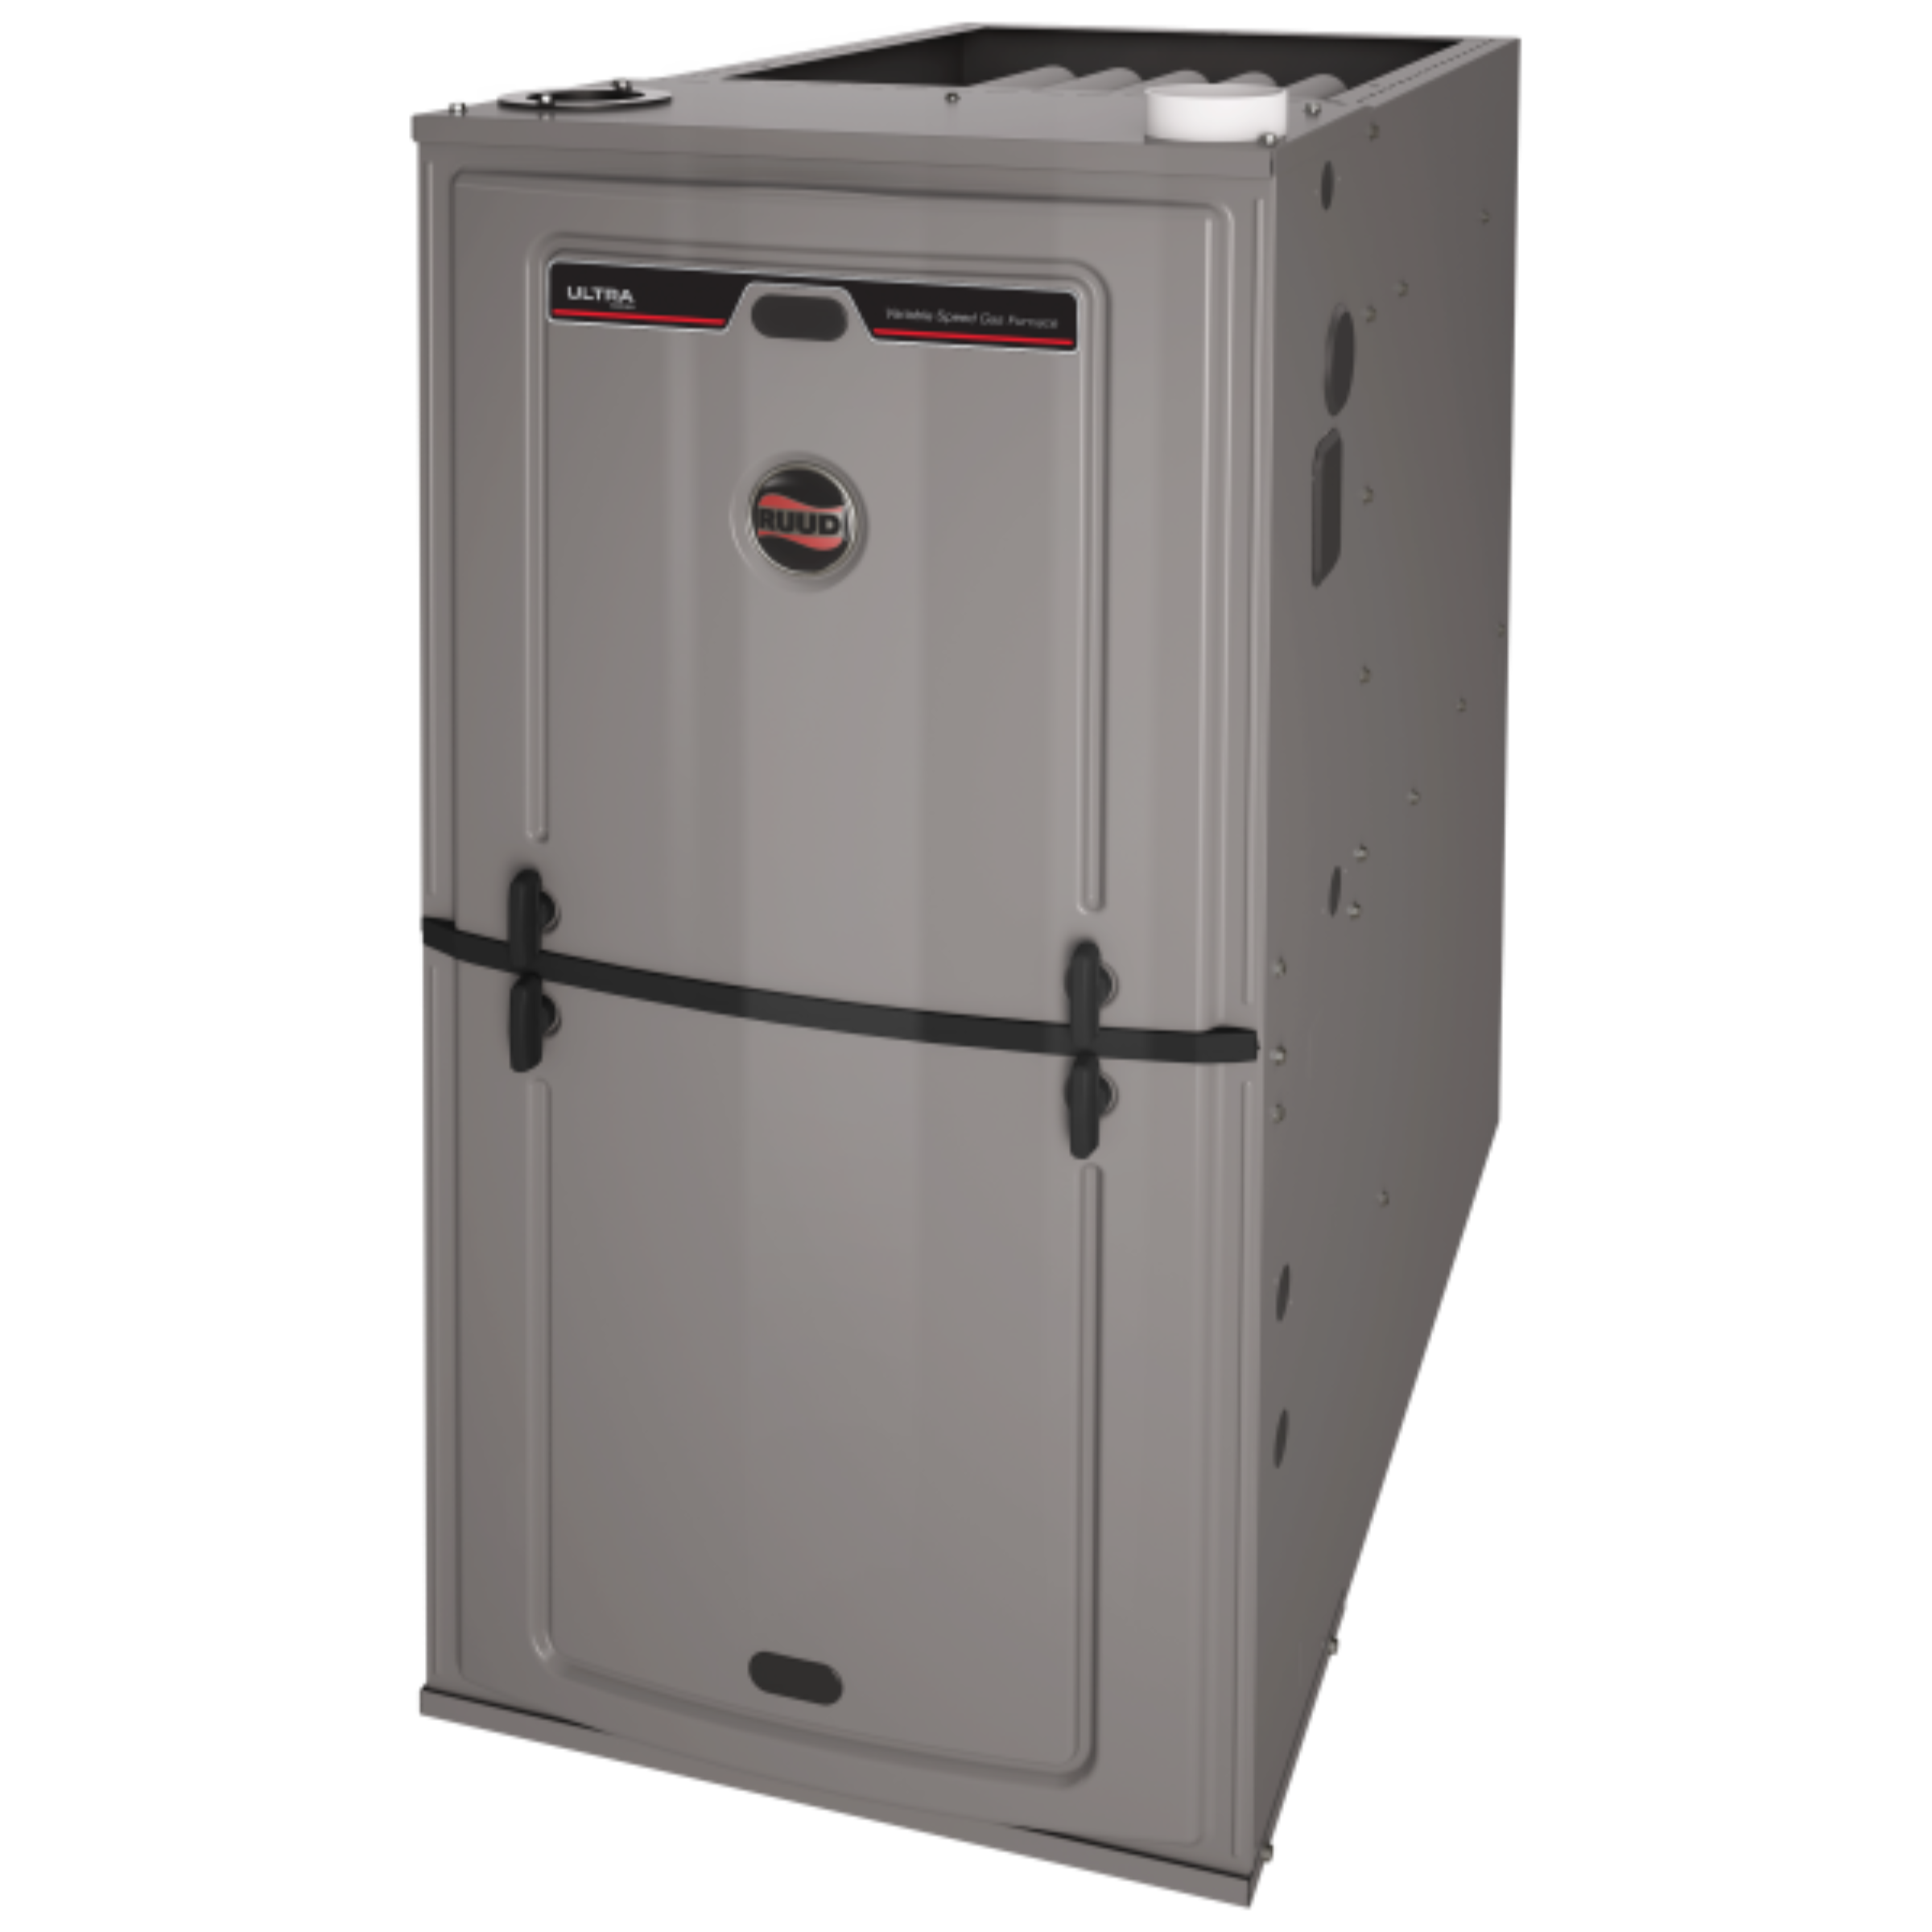 U96V Ruud Ultra™ Series Two-Stage Variable Speed Upflow Gas Furnace Input Rates of 40 to 115 kBTU, 96% A.F.U.E., Energy Star Qualified